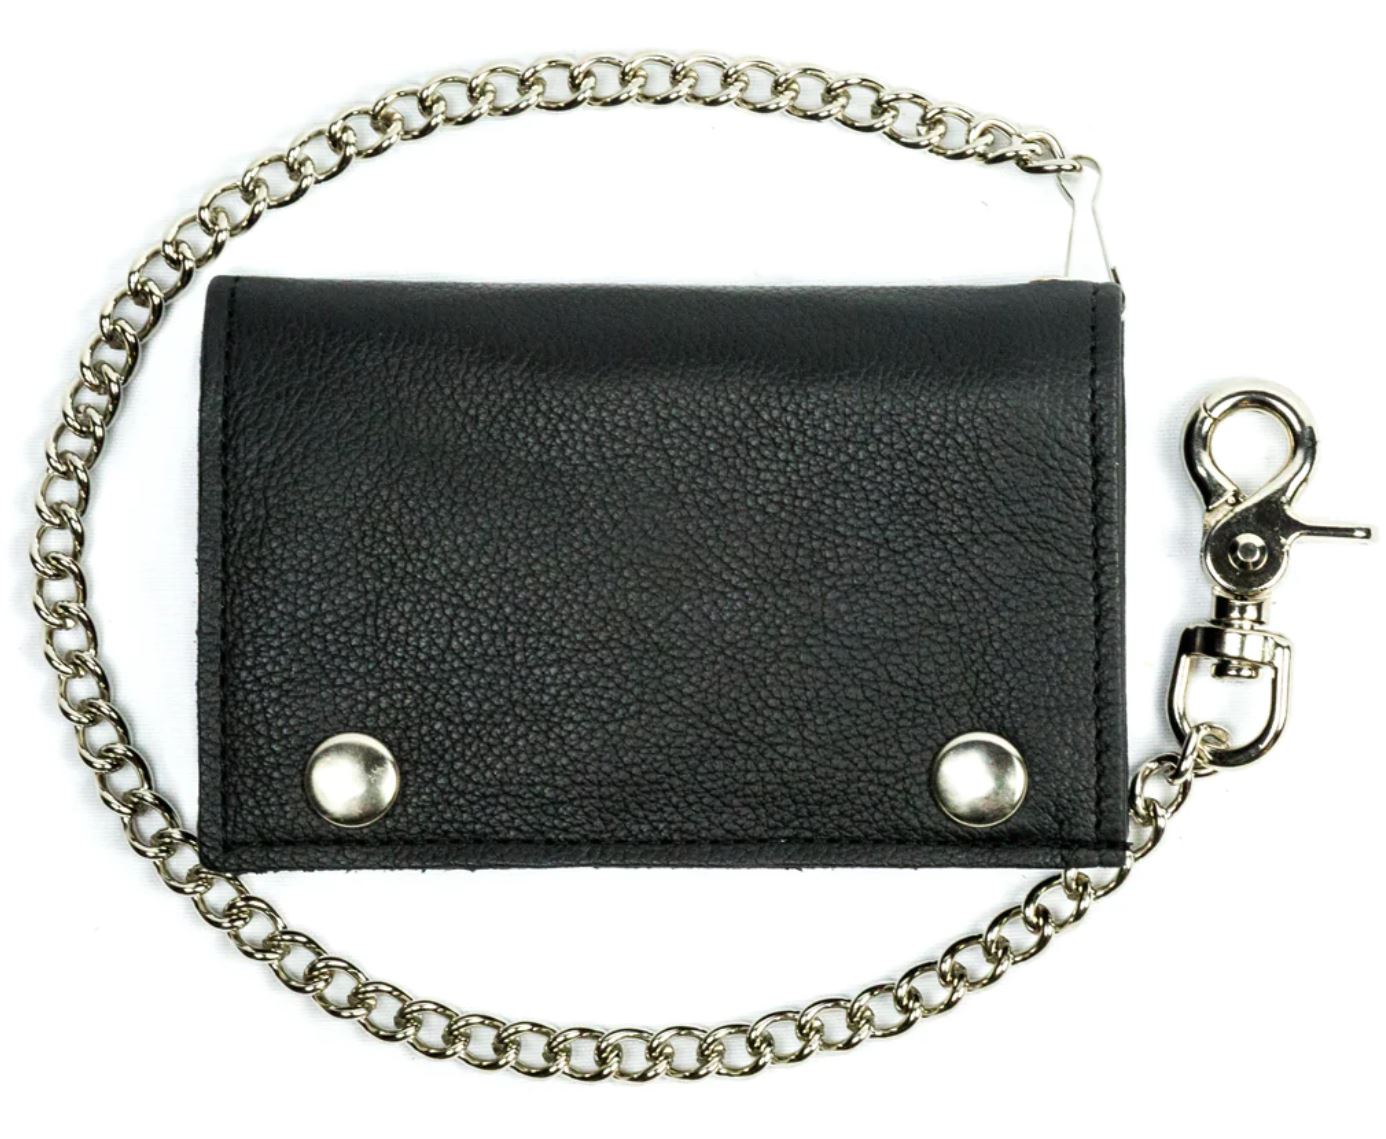 It's SOFT Cowhide LEATHER that's close to a standard tri-fold size! 2 card slots in the middle with an I.D. slot on the other side. 2 underneath slots, 1 larger cash slot for all your important stash, and 1 zip pocket for the coins. An 18" chrome plated chain is attached to the back of the wallet. Standard long tri-fold size. Size is approx. 5.75"x 3.5" when snapped closed. Like most wallets over stuffing will limit the time of use. Made in USA.